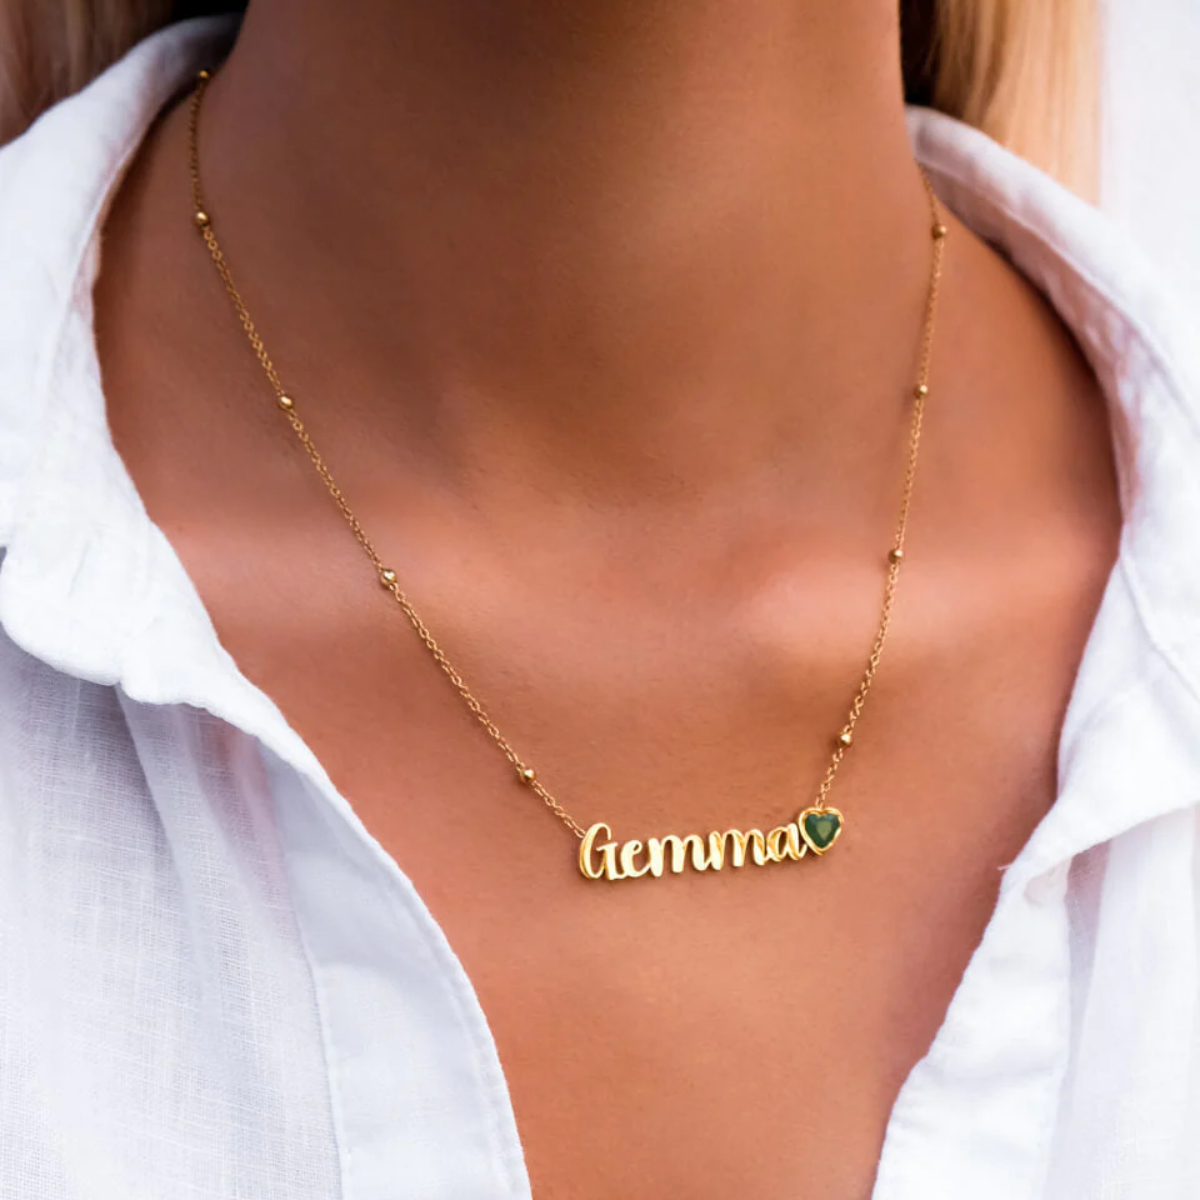 21. Personalized Name Necklace: A Unique and Thoughtful Anniversary Gift Idea for Her